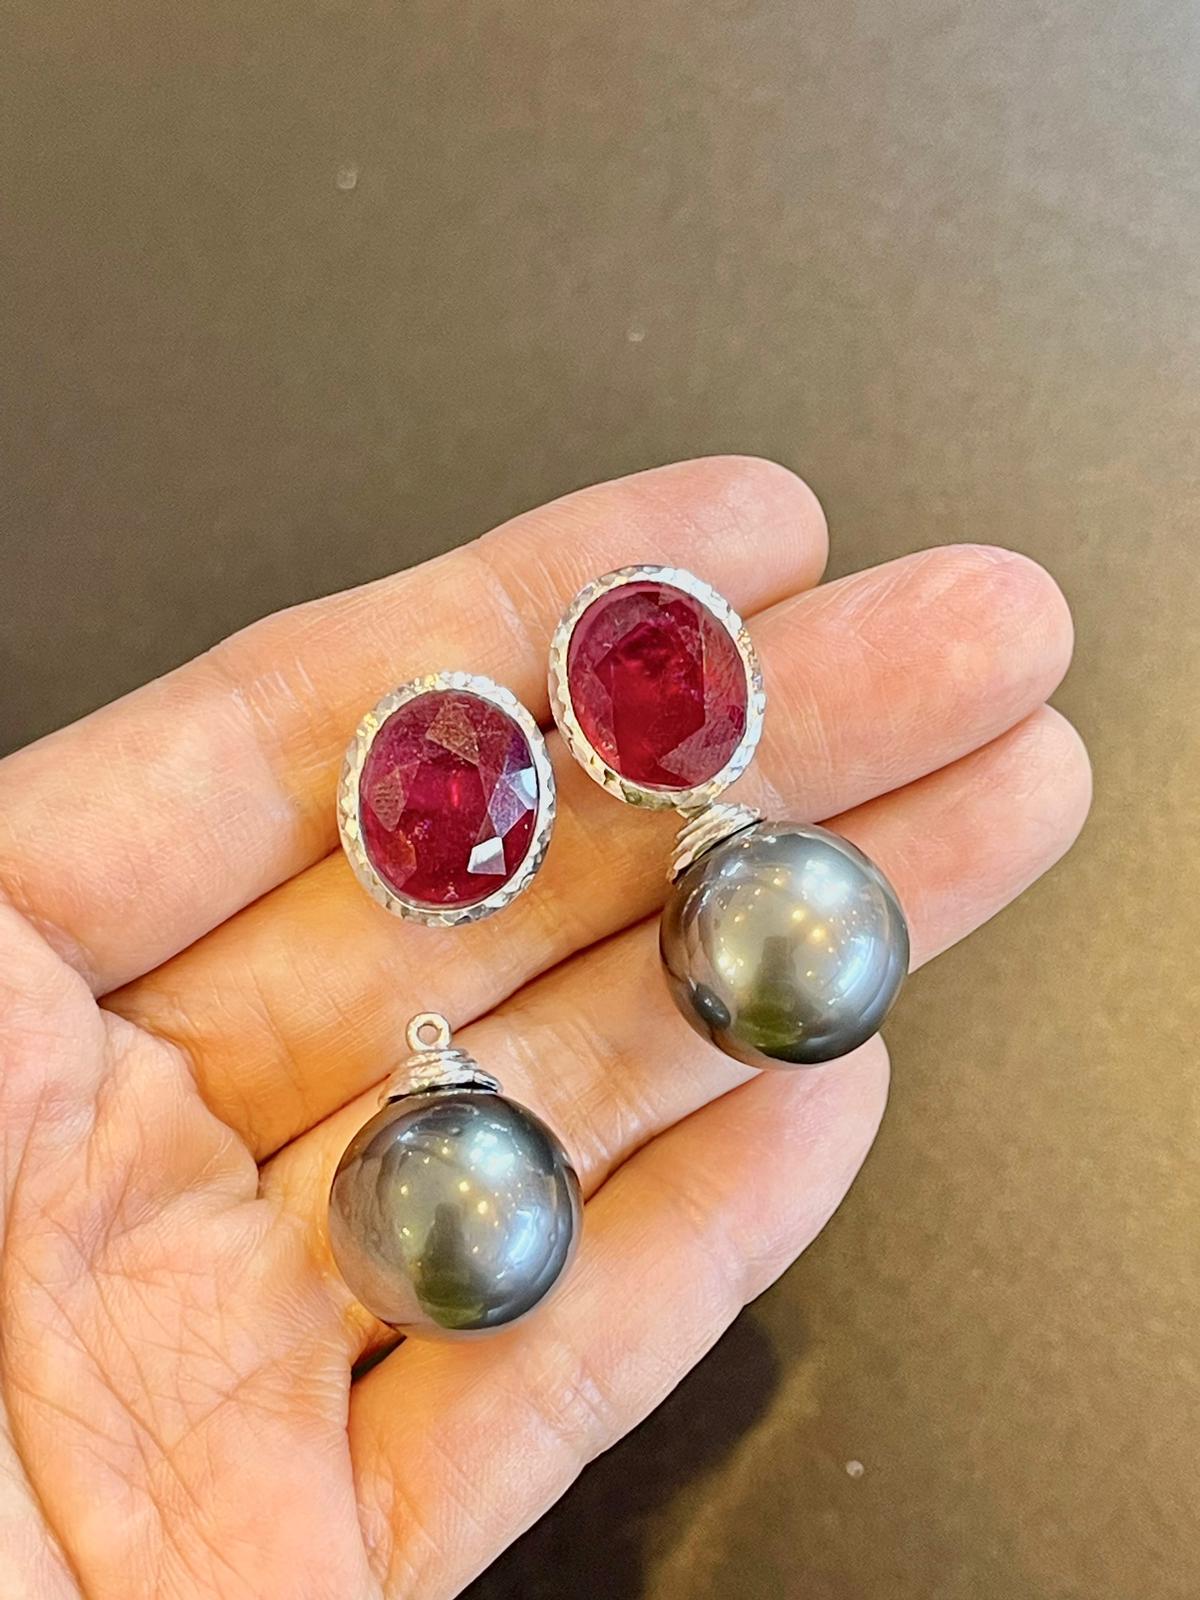 Bochic Natural Ruby and South Sea Pearl Changeable Earrings 
Natural Red Ruby - 15 Carat 
Shape - oval shape, faceted 
South Sea Tahiti cultured pearls - Color/Gray - Tone/Pink
Size 13 MM
18K White Gold and Silver 
The top parts can be worn as studs